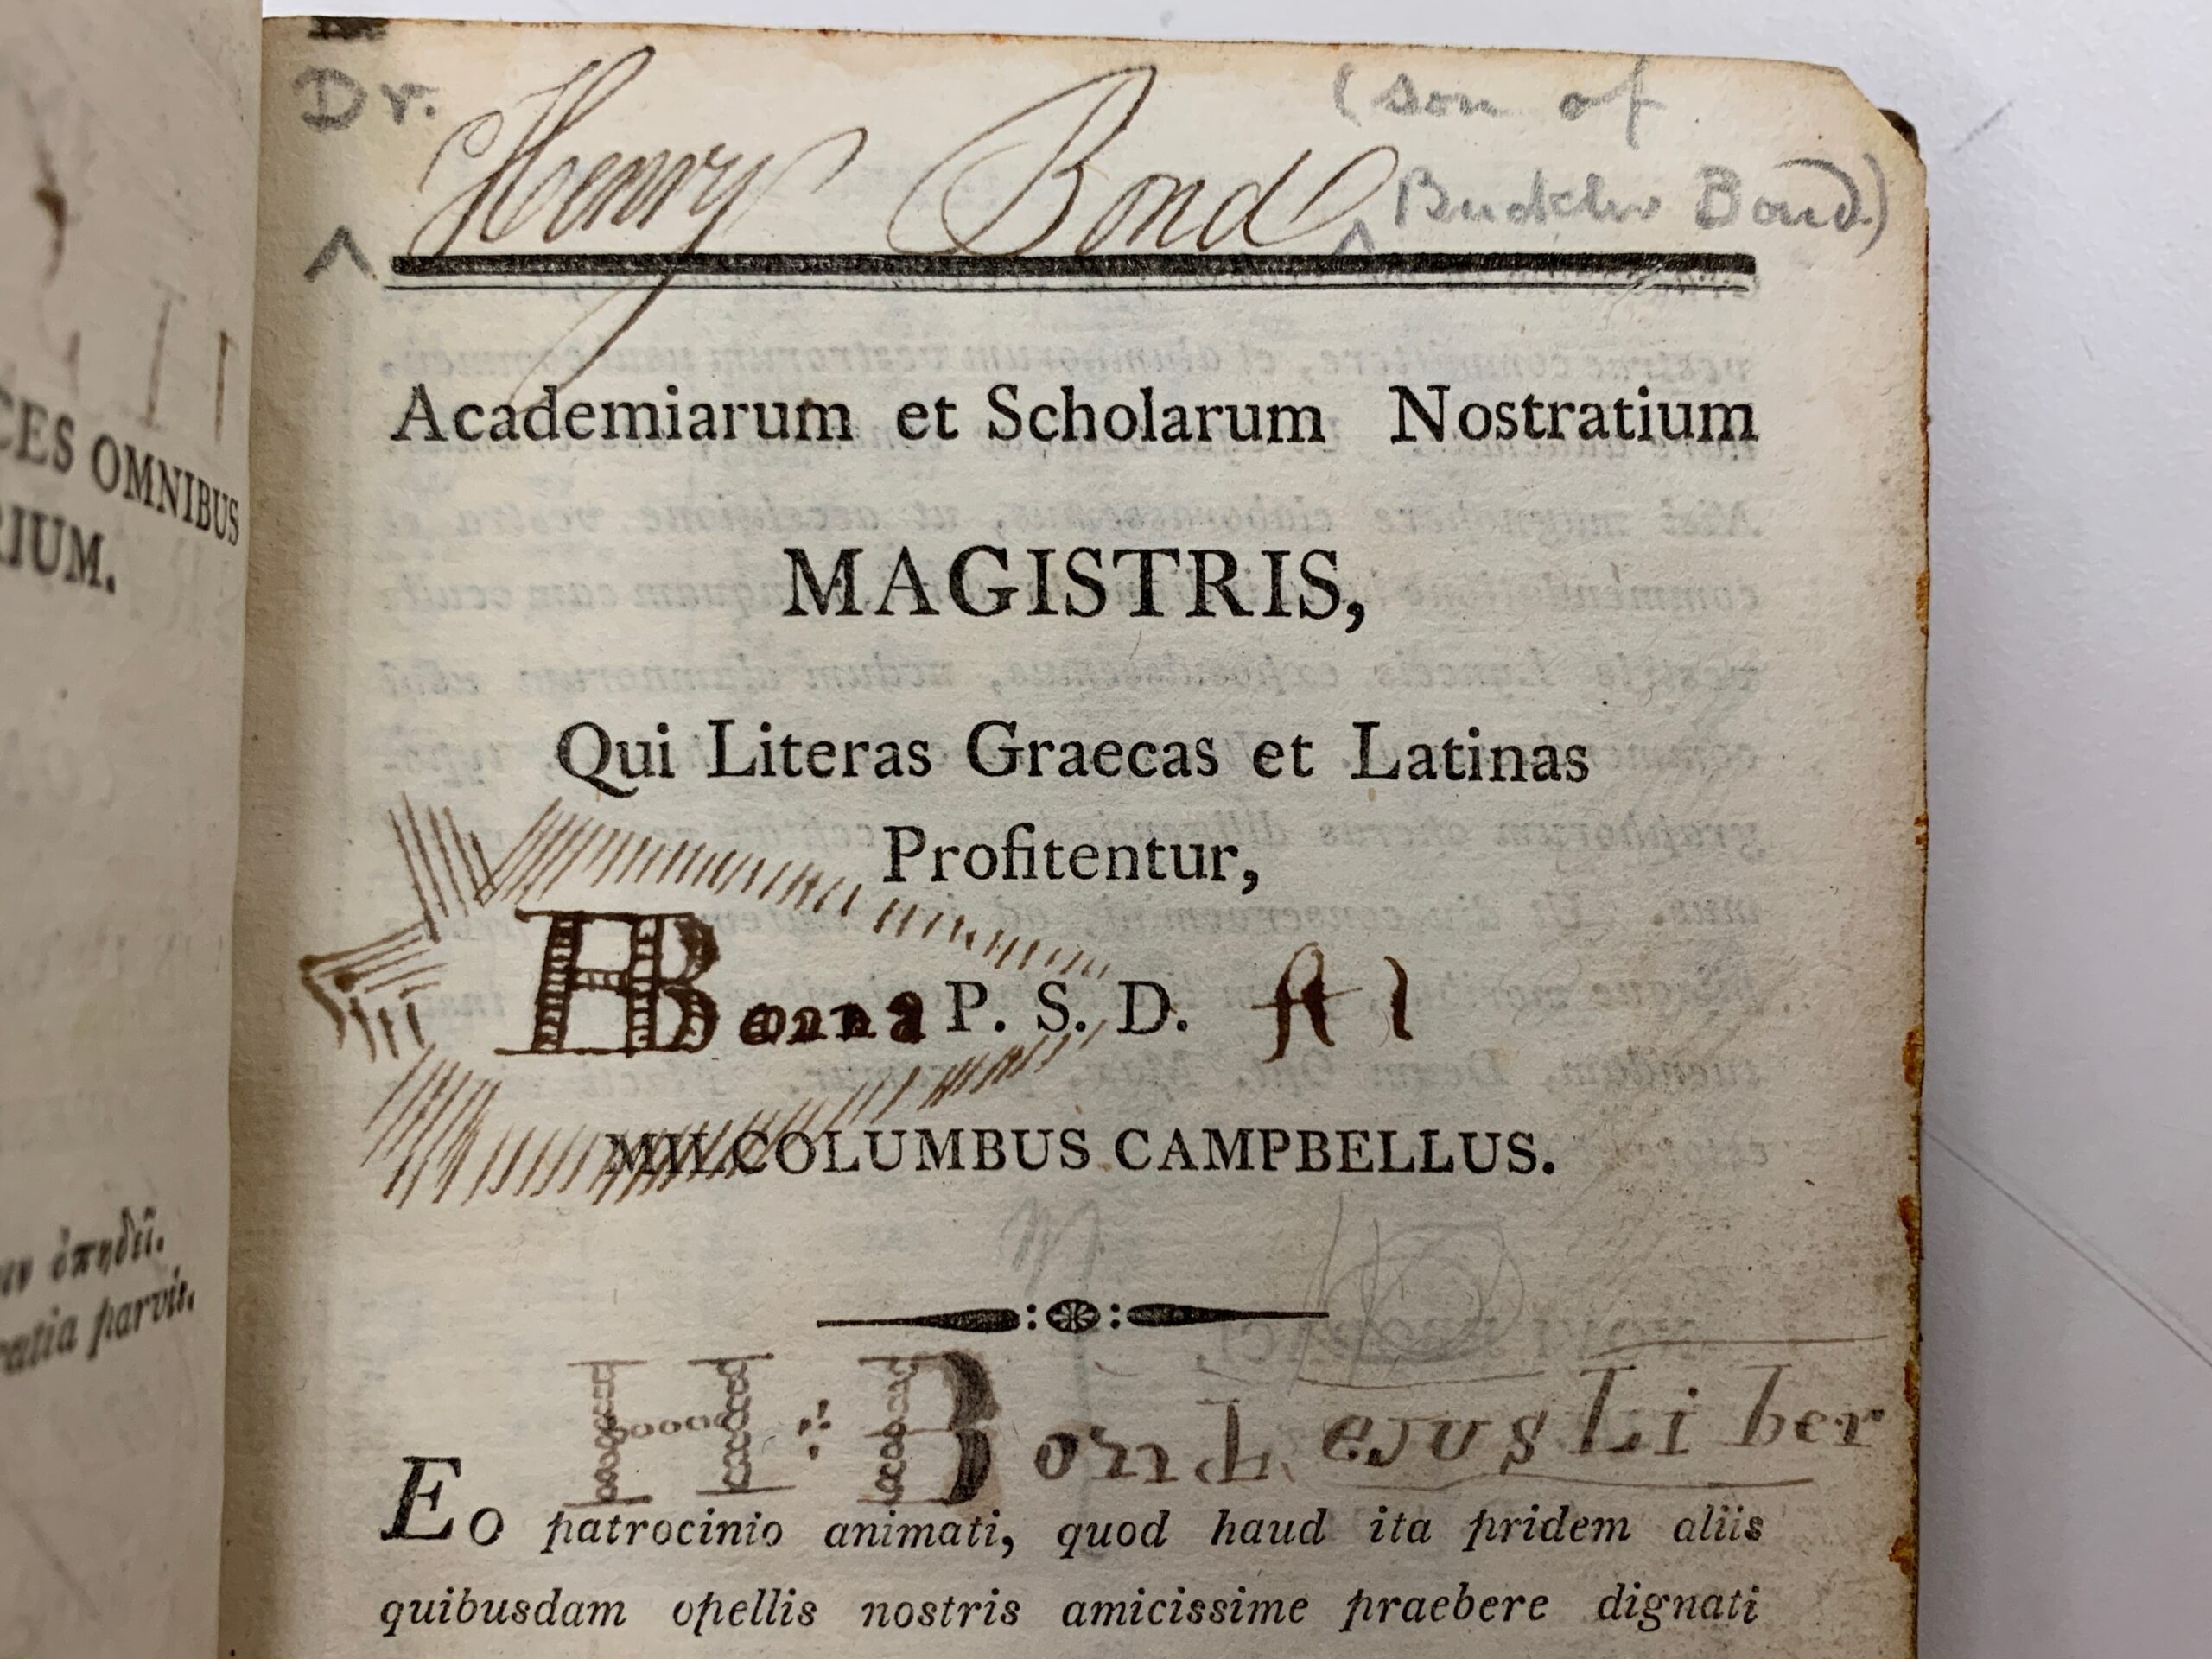 Tracing Ownership & Usage in the Classics Rare Book Collection